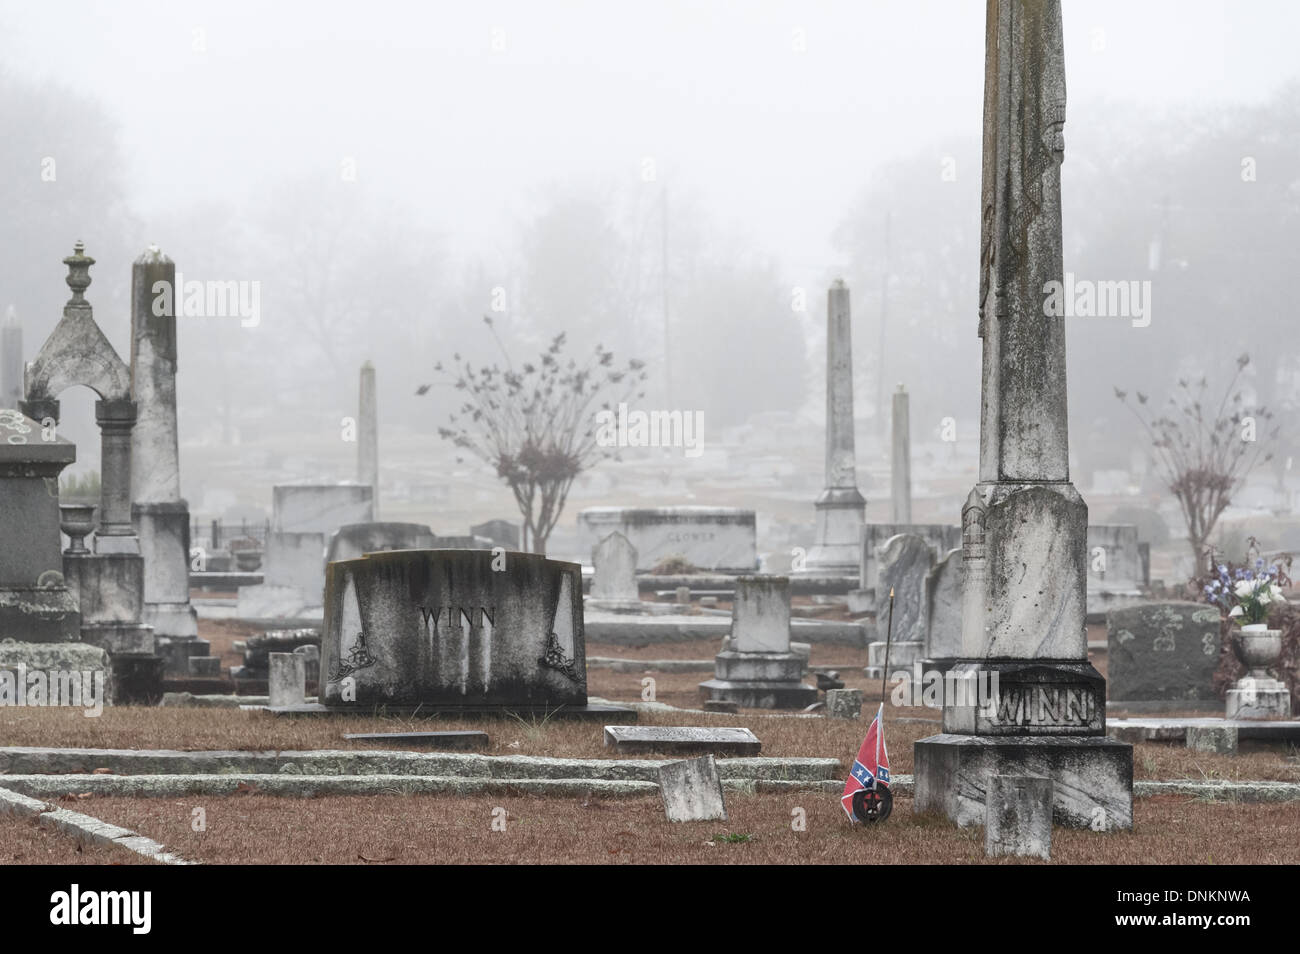 A Confederate veteran medal and flag accompany a grave marker in a fog shrouded cemetery in Lawrenceville, Georgia. (USA) Stock Photo